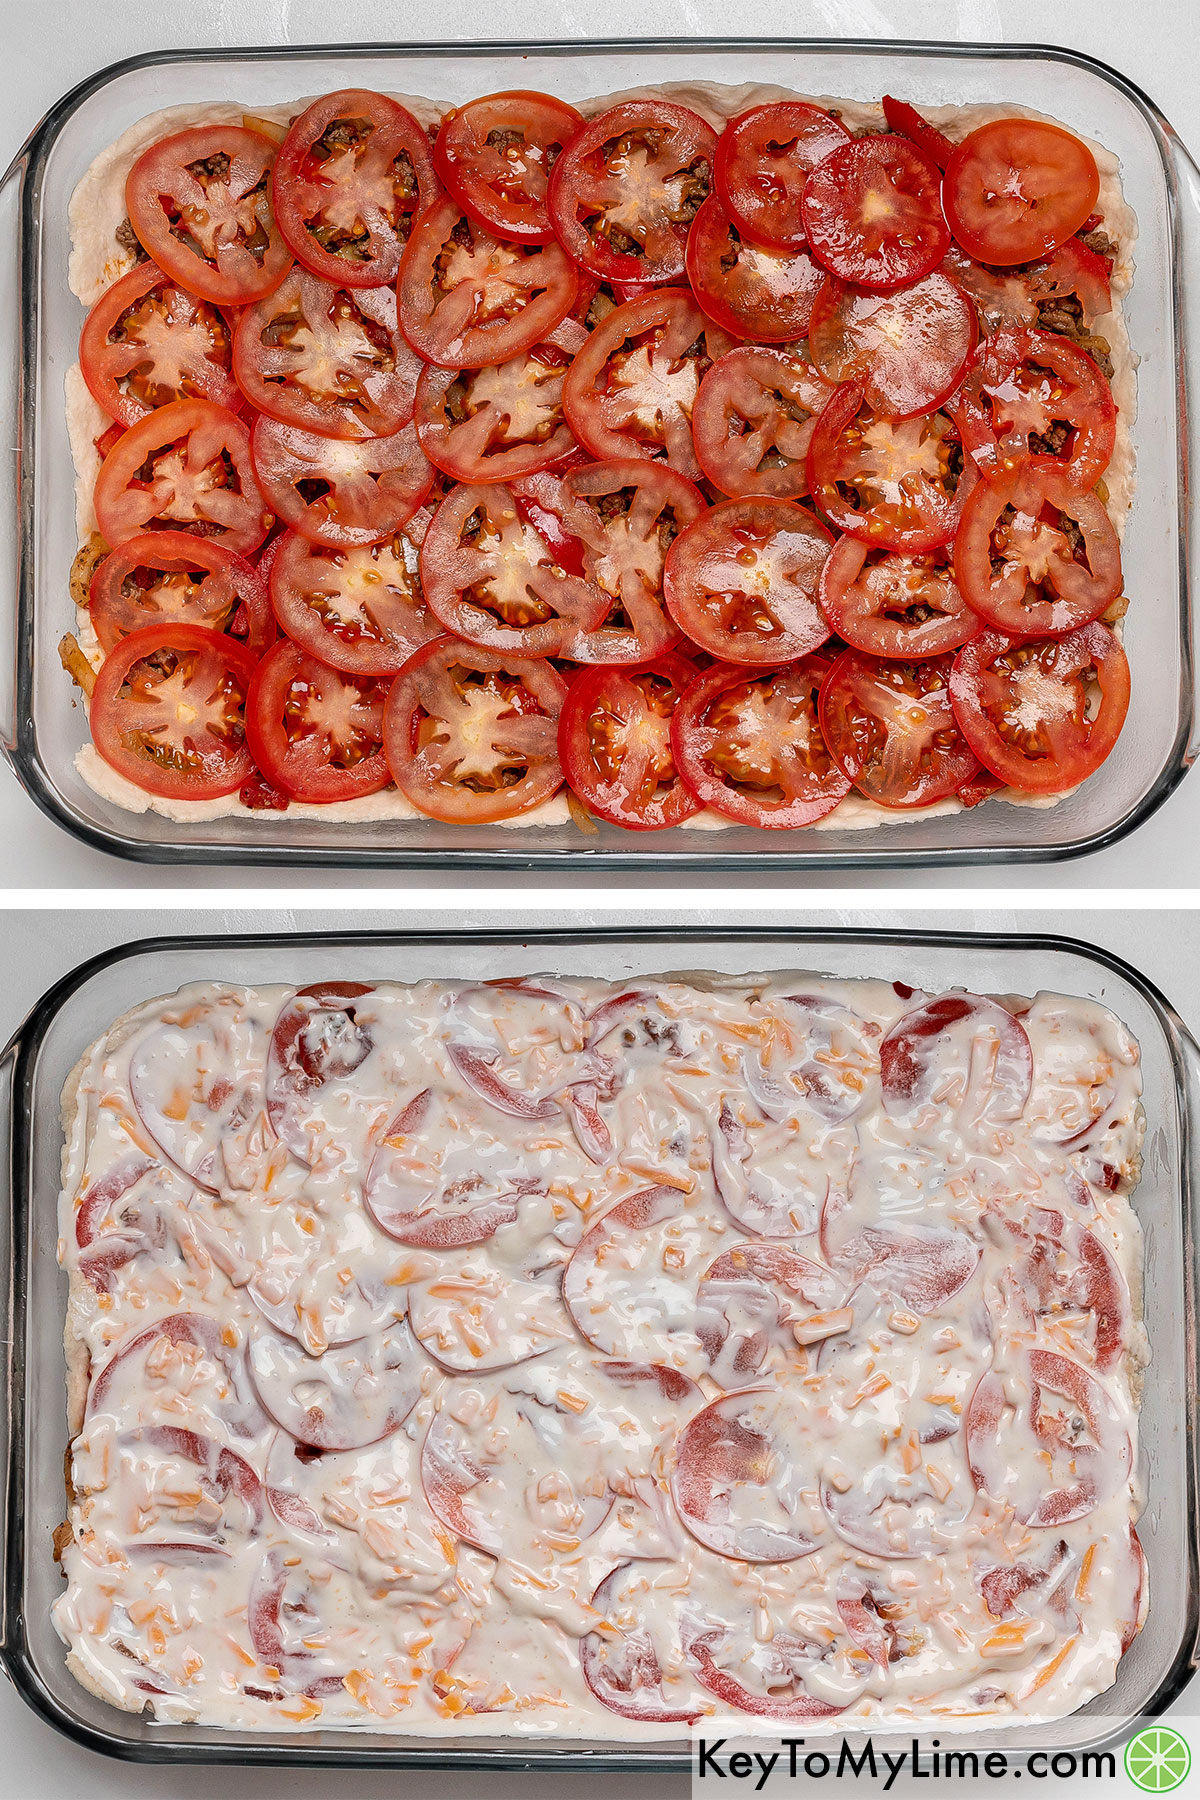 Layering the top of the meat with thin sliced tomatoes then layering with cream sauce on top.